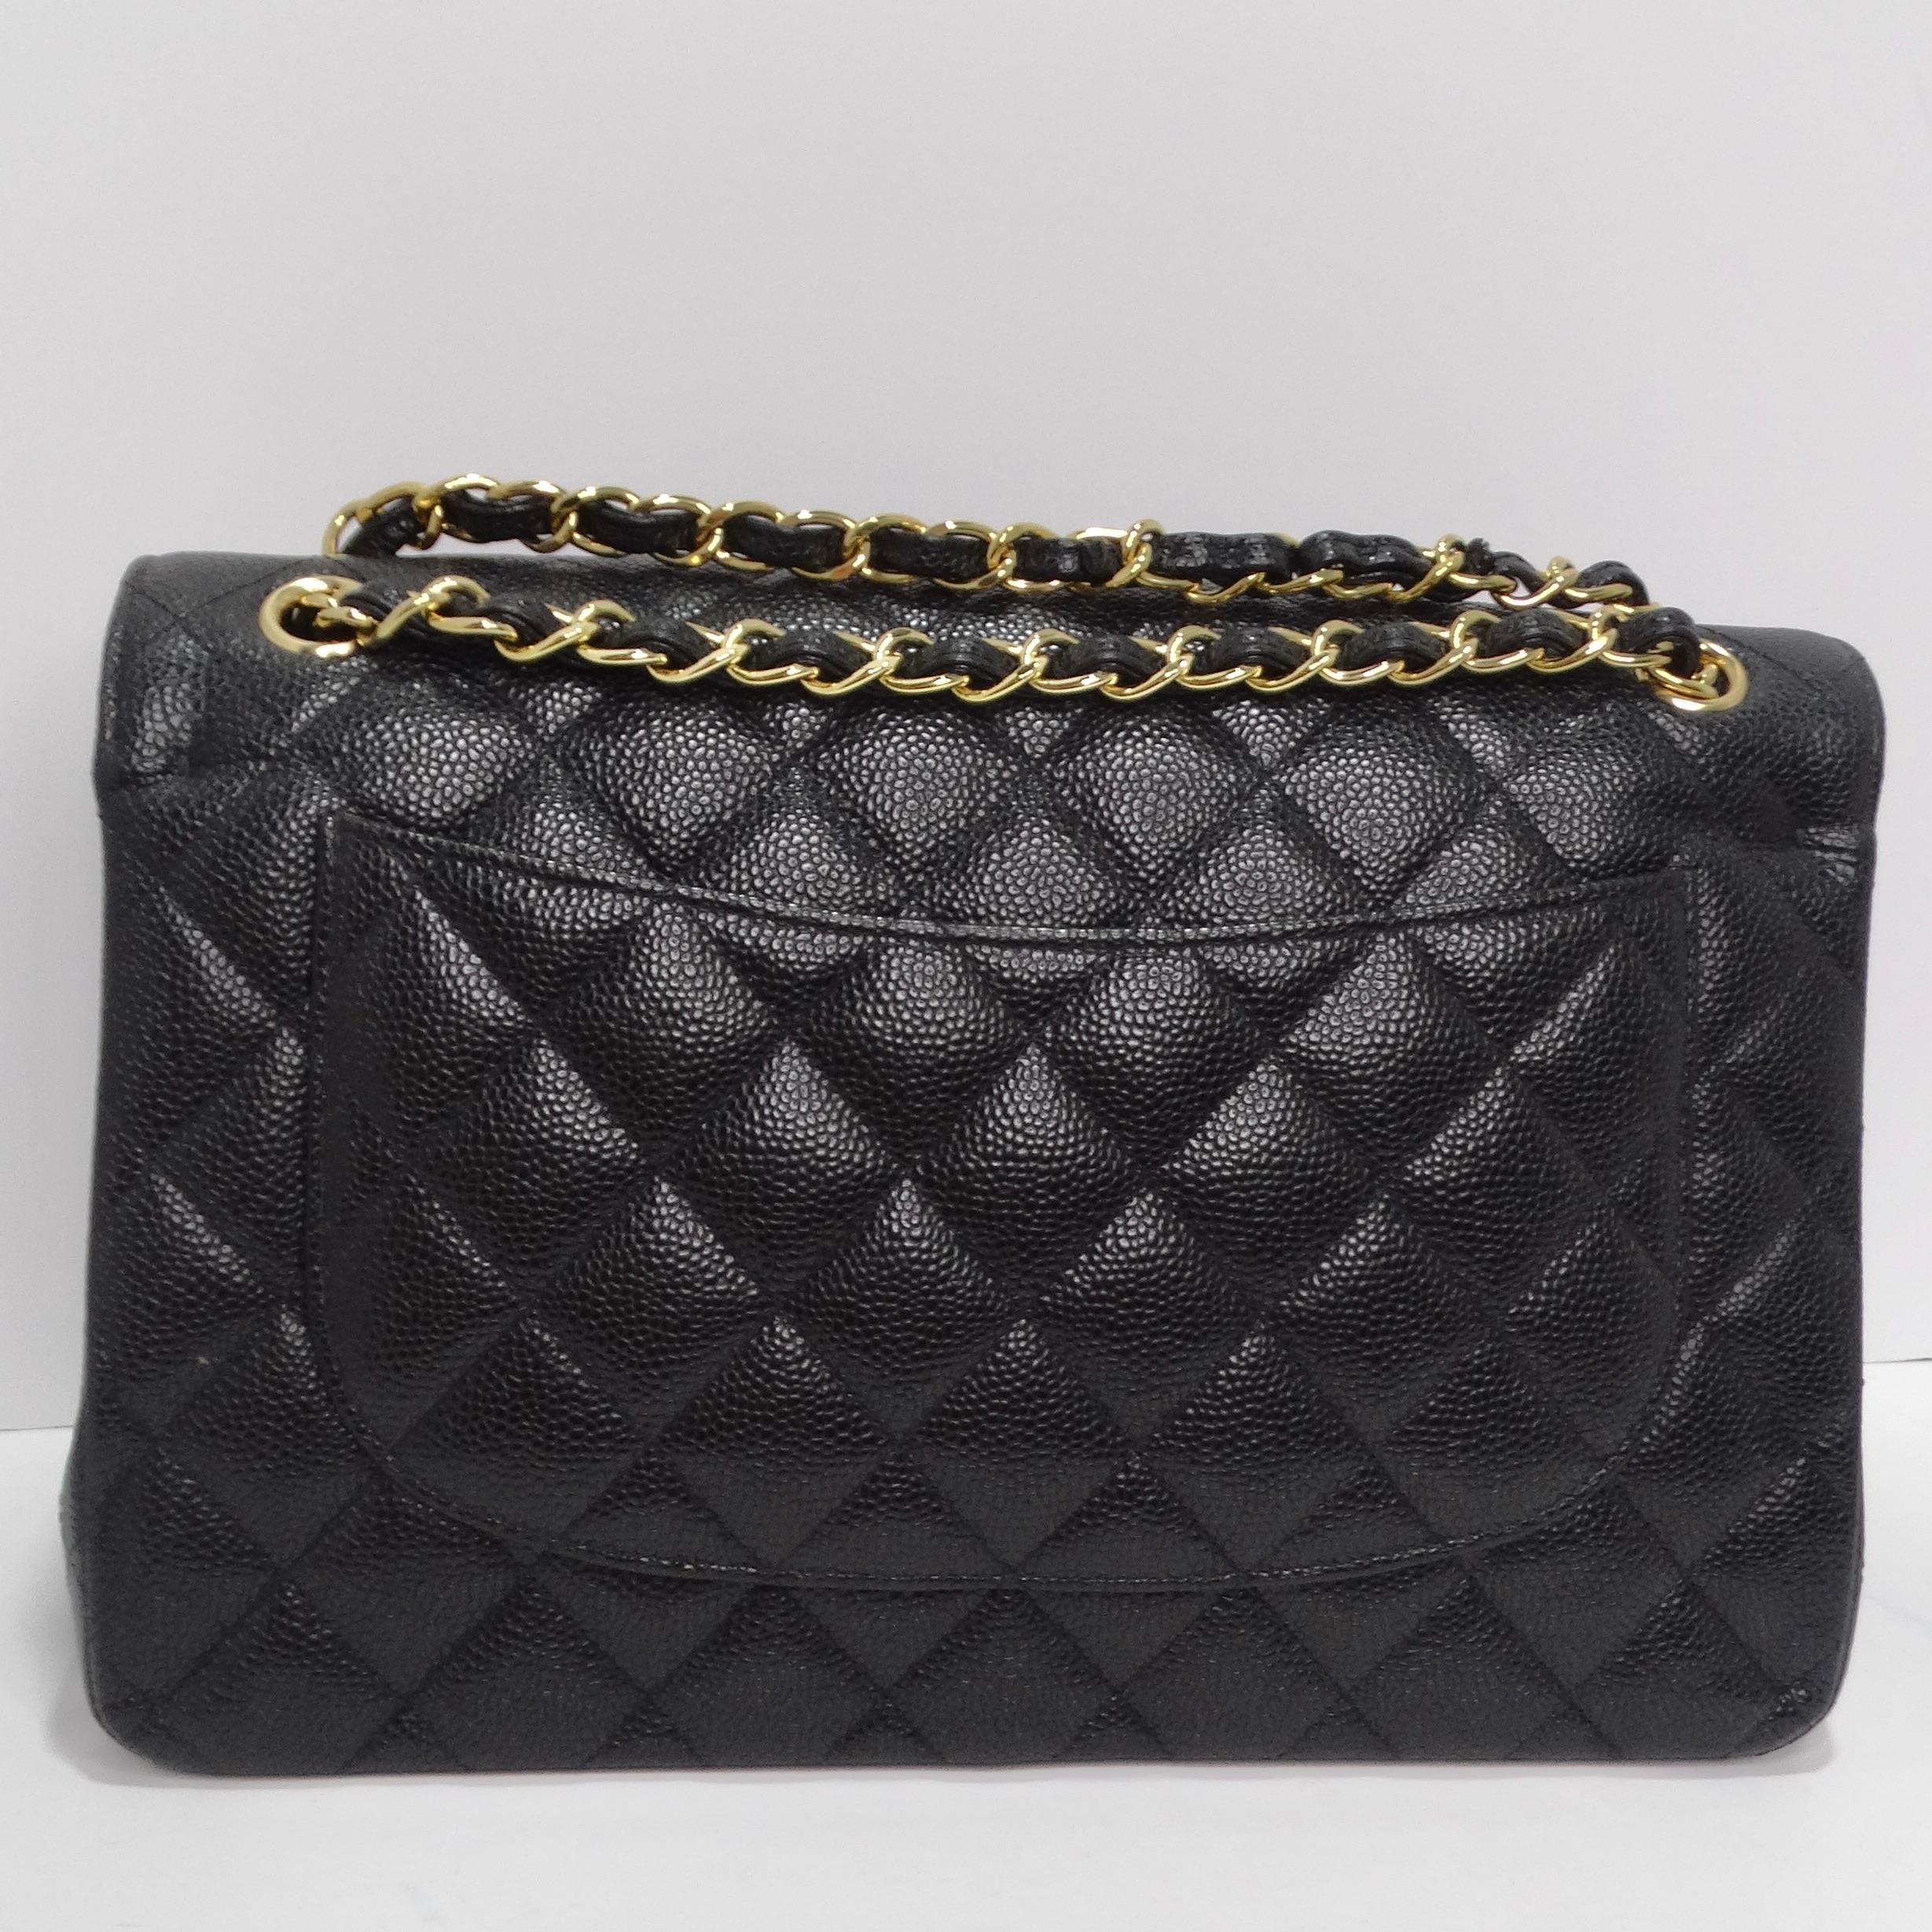 Women's or Men's Chanel Large Classic Quilted Caviar Handbag Black/Burgundy